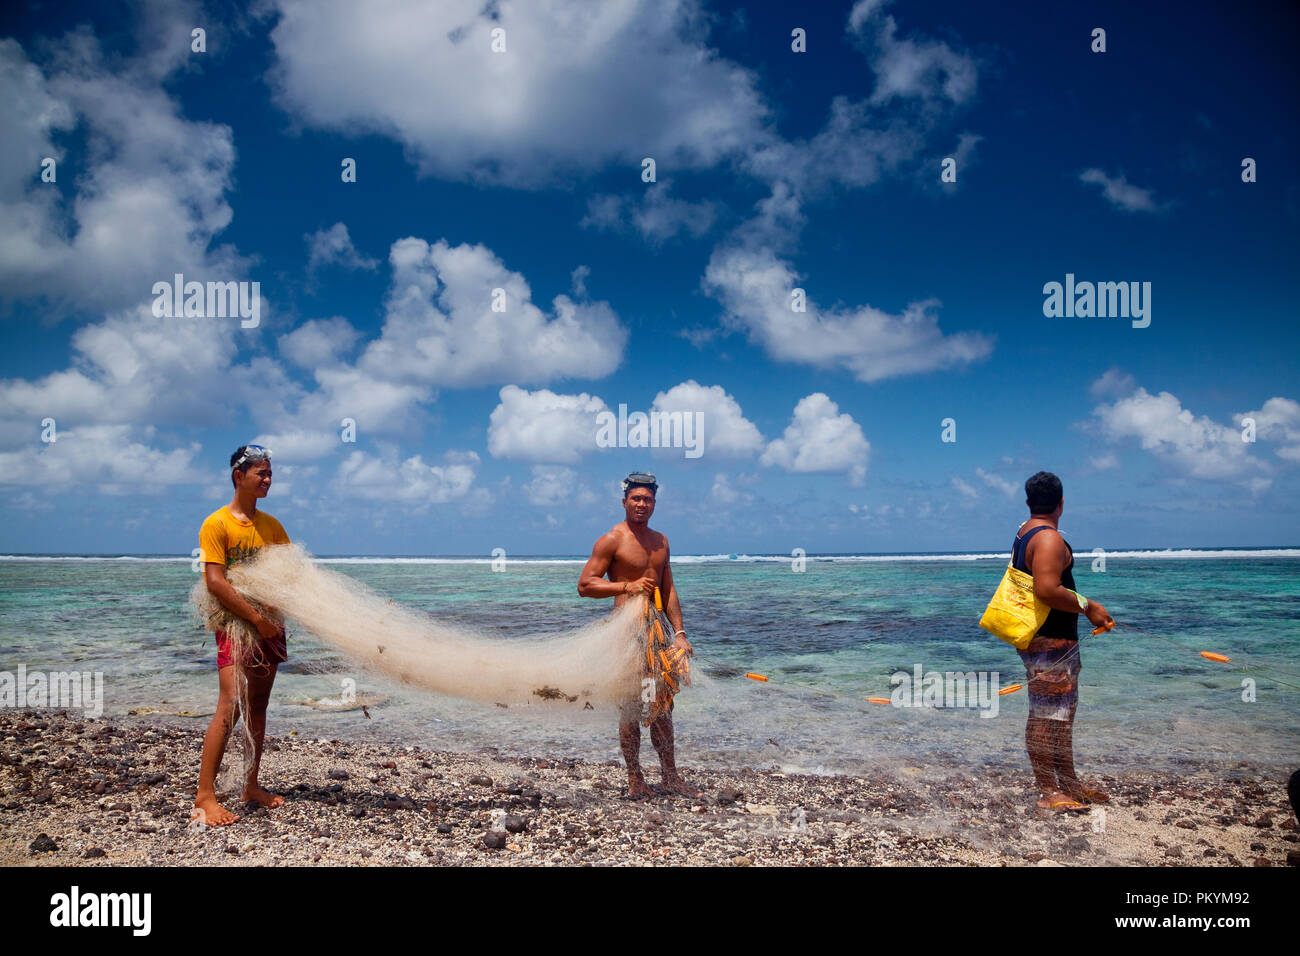 Locals prepare a fishing net to catch fish in the lagoon at Lepa